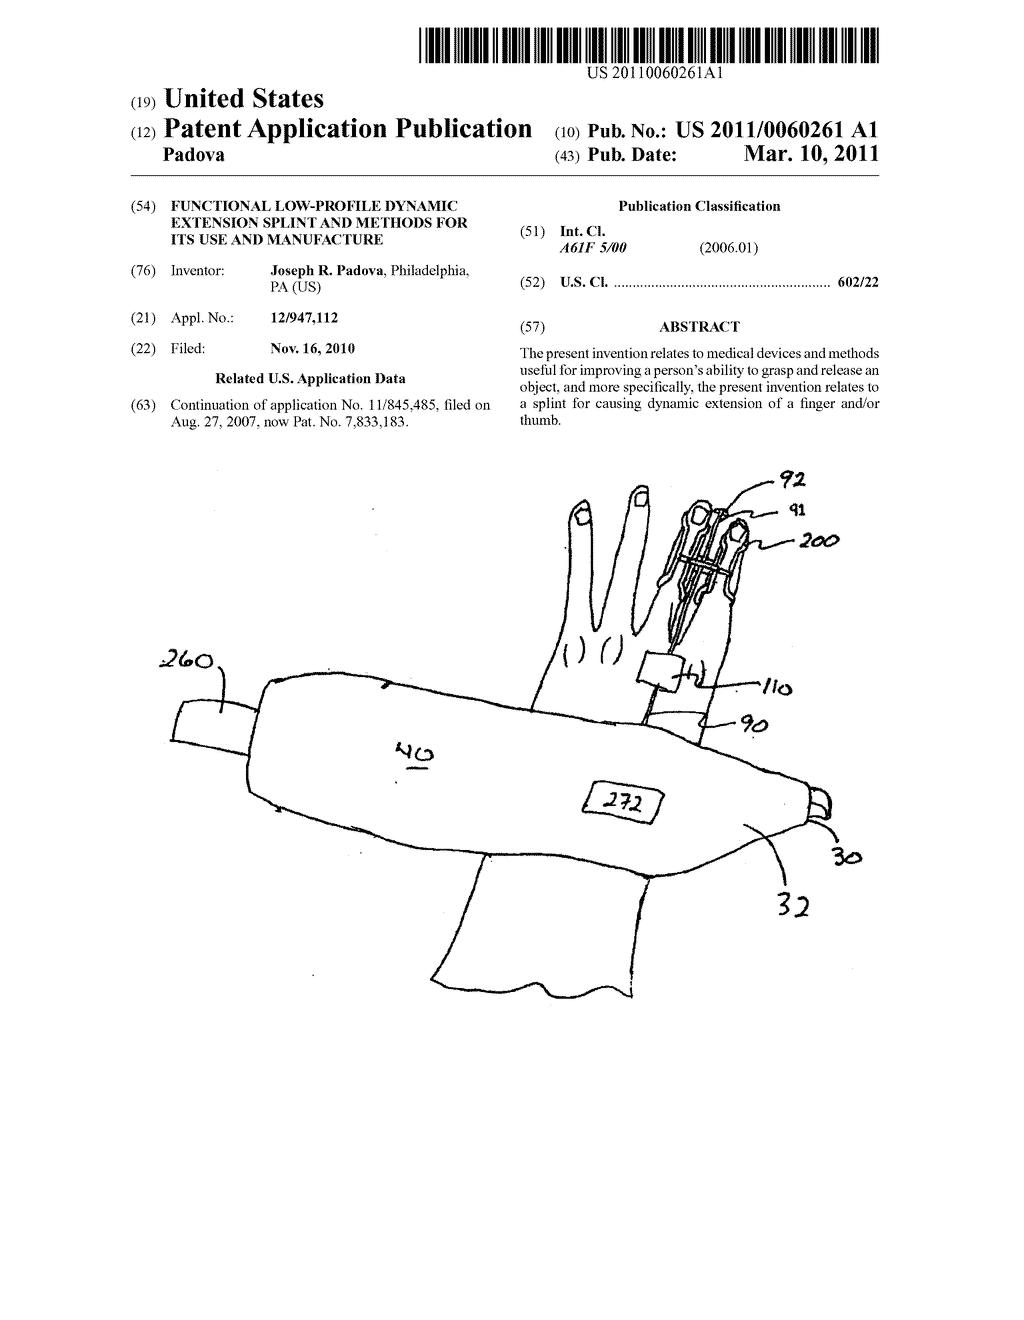 Functional Low-Profile Dynamic Extension Splint and Methods for its Use and Manufacture - diagram, schematic, and image 01